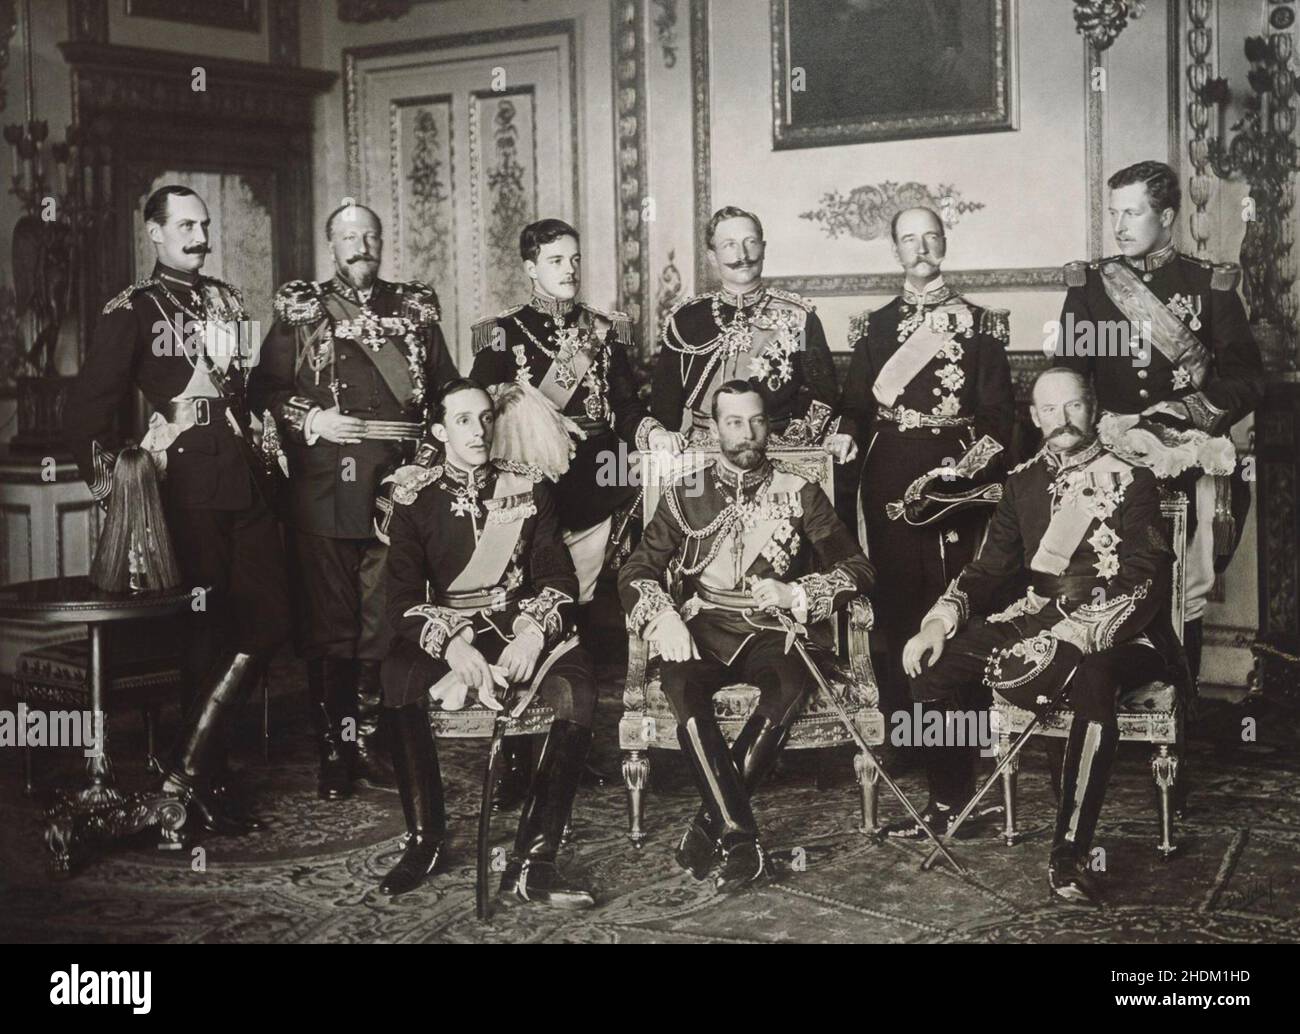 NINE KINGS gathered at Windsor Castle for the funeral of  Edward VII in May 1910. From l to r standing: King Haakon  VII of Norway, Tsar Ferdinand of the Bulgarians, King Manuel II of Portugal and the Algarve, Kaiser Wilhelm II of Germany and Prussia, King George I of the Hellenes, King Albert I of the Belgians. Seated from left:  King Alfonso XII of Spain,King George V of the United Kingdom, King Frederick VIII of Denmark Stock Photo